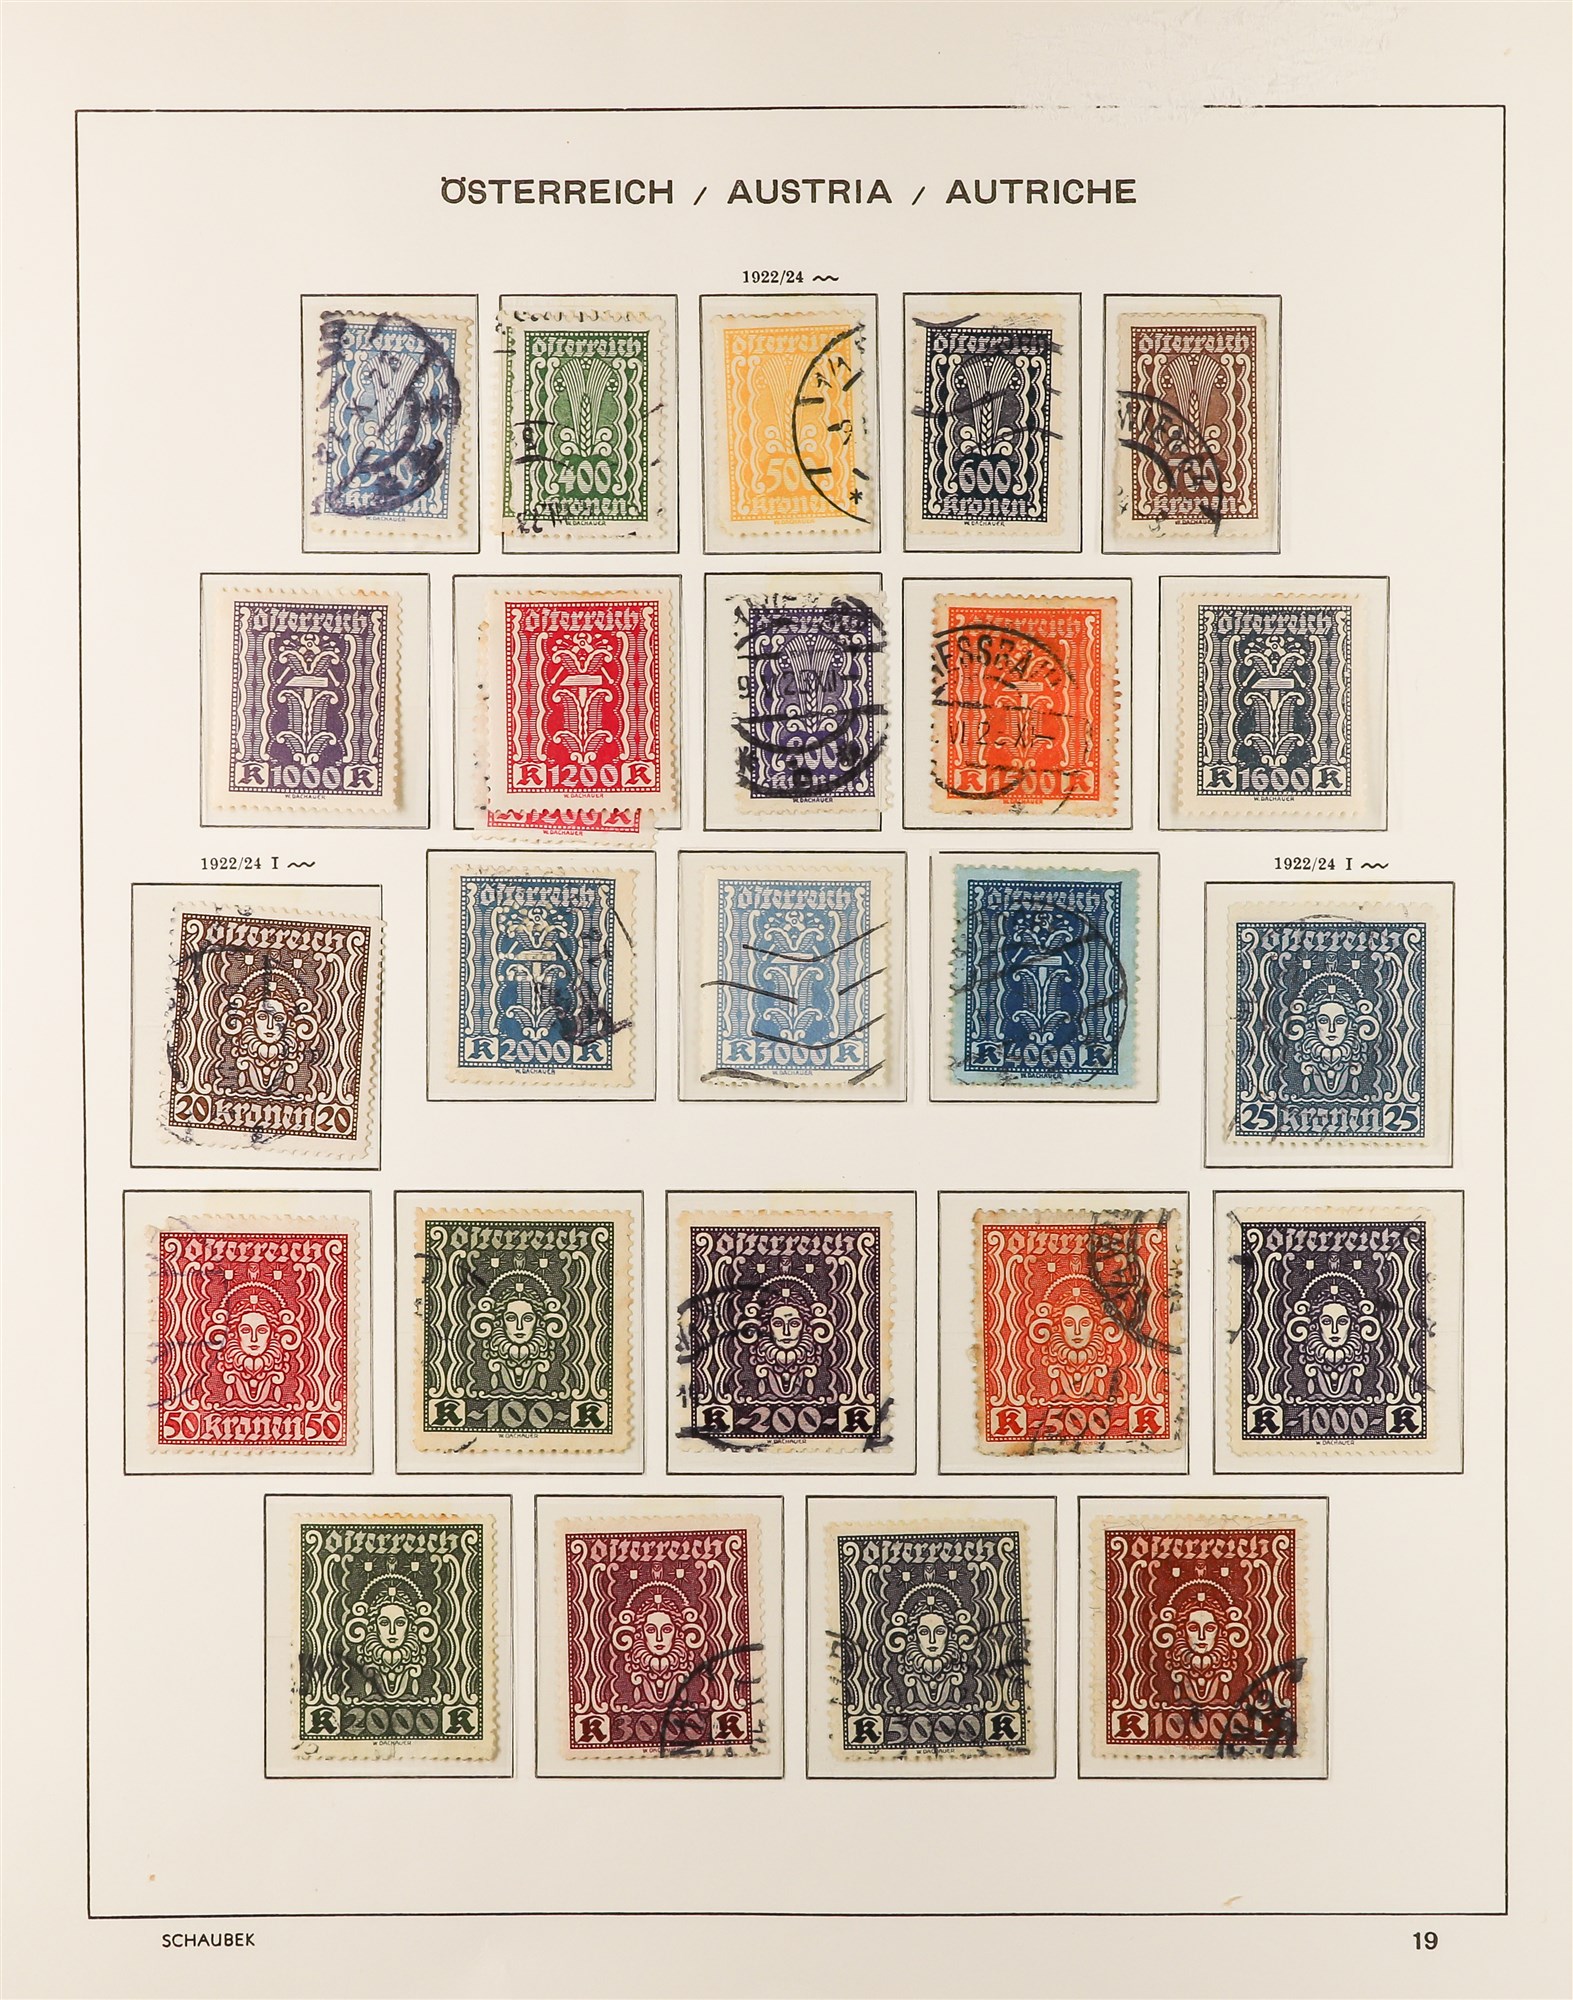 AUSTRIA 1850 - 1937 COLLECTION. of around 1000 mint & used stamps in Schaubek Austria hingeless - Image 17 of 29